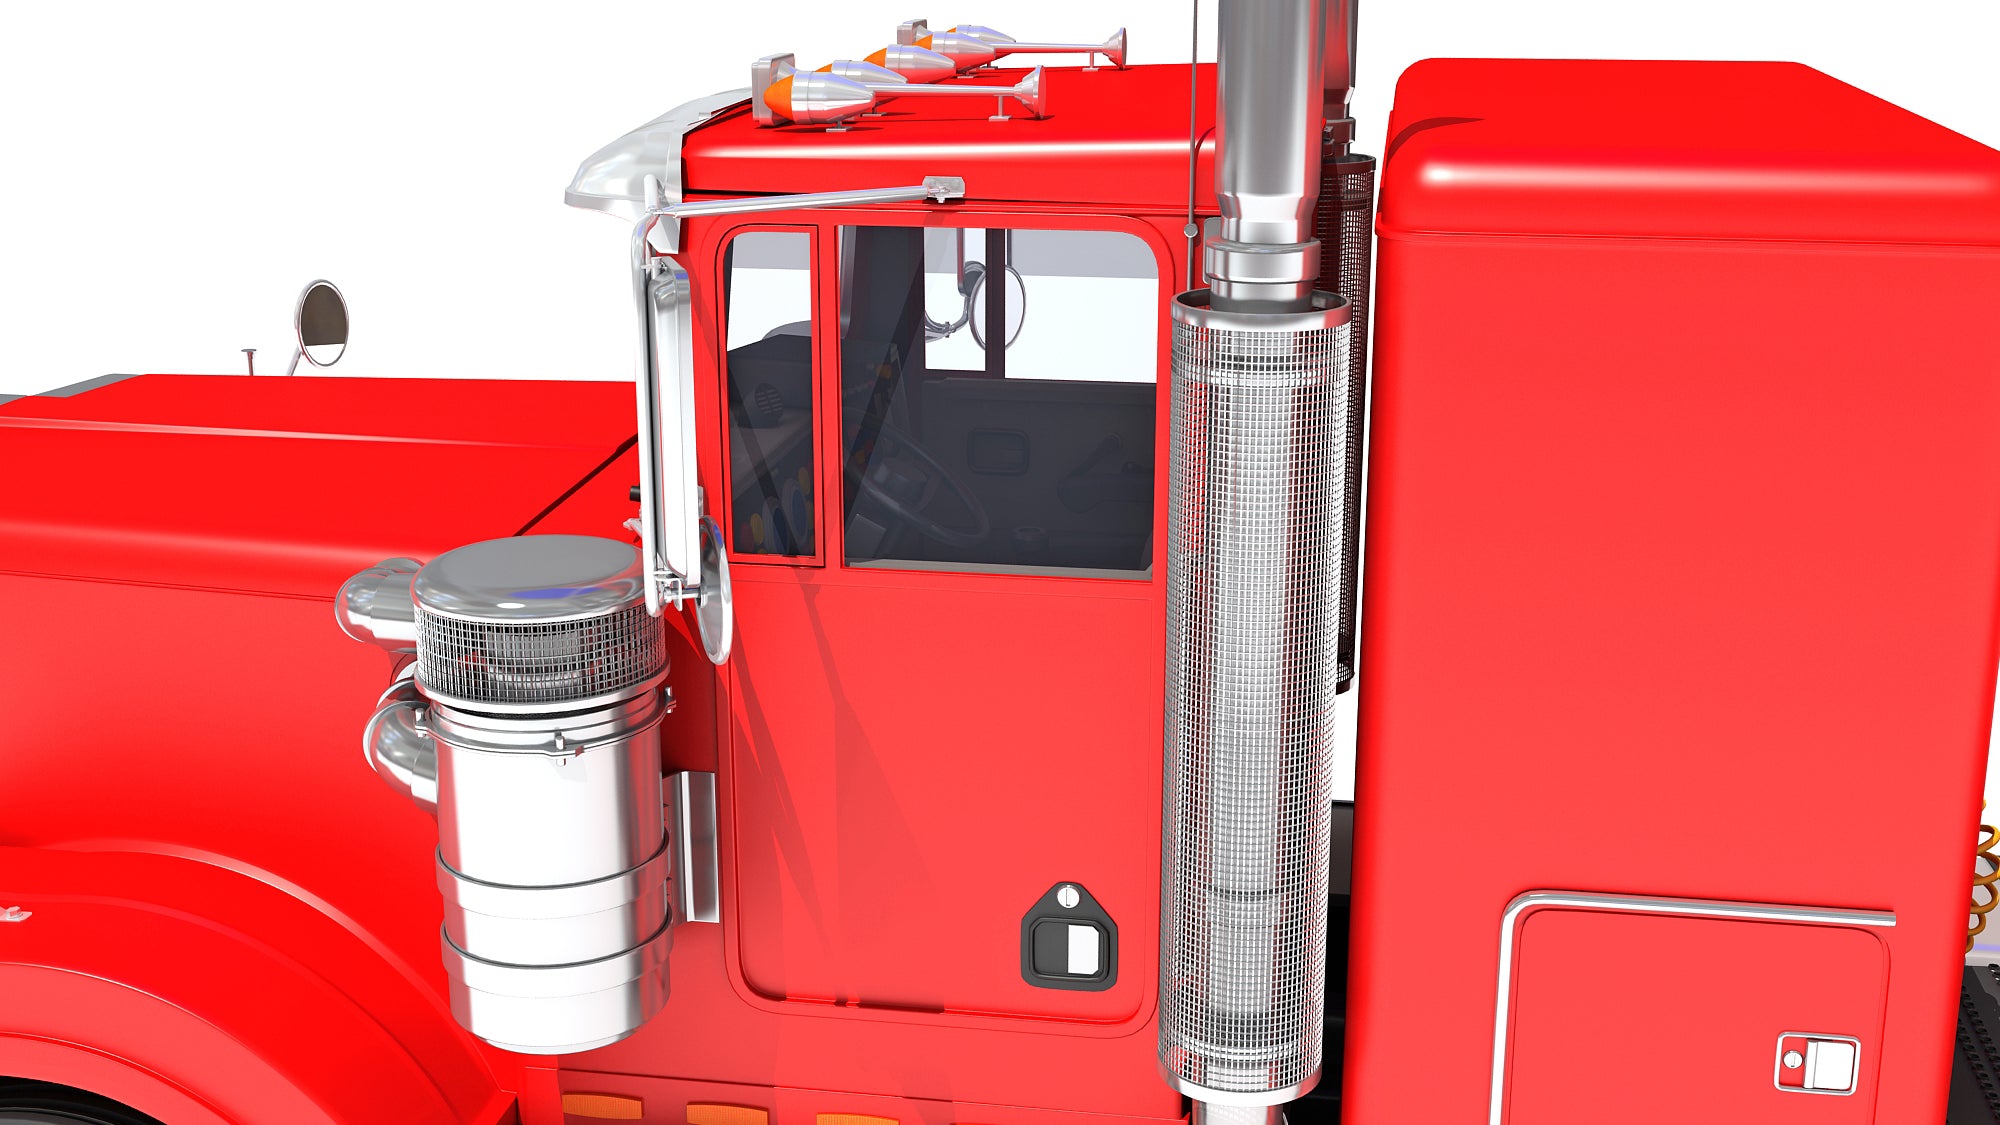 3D Truck with Tank Trailer